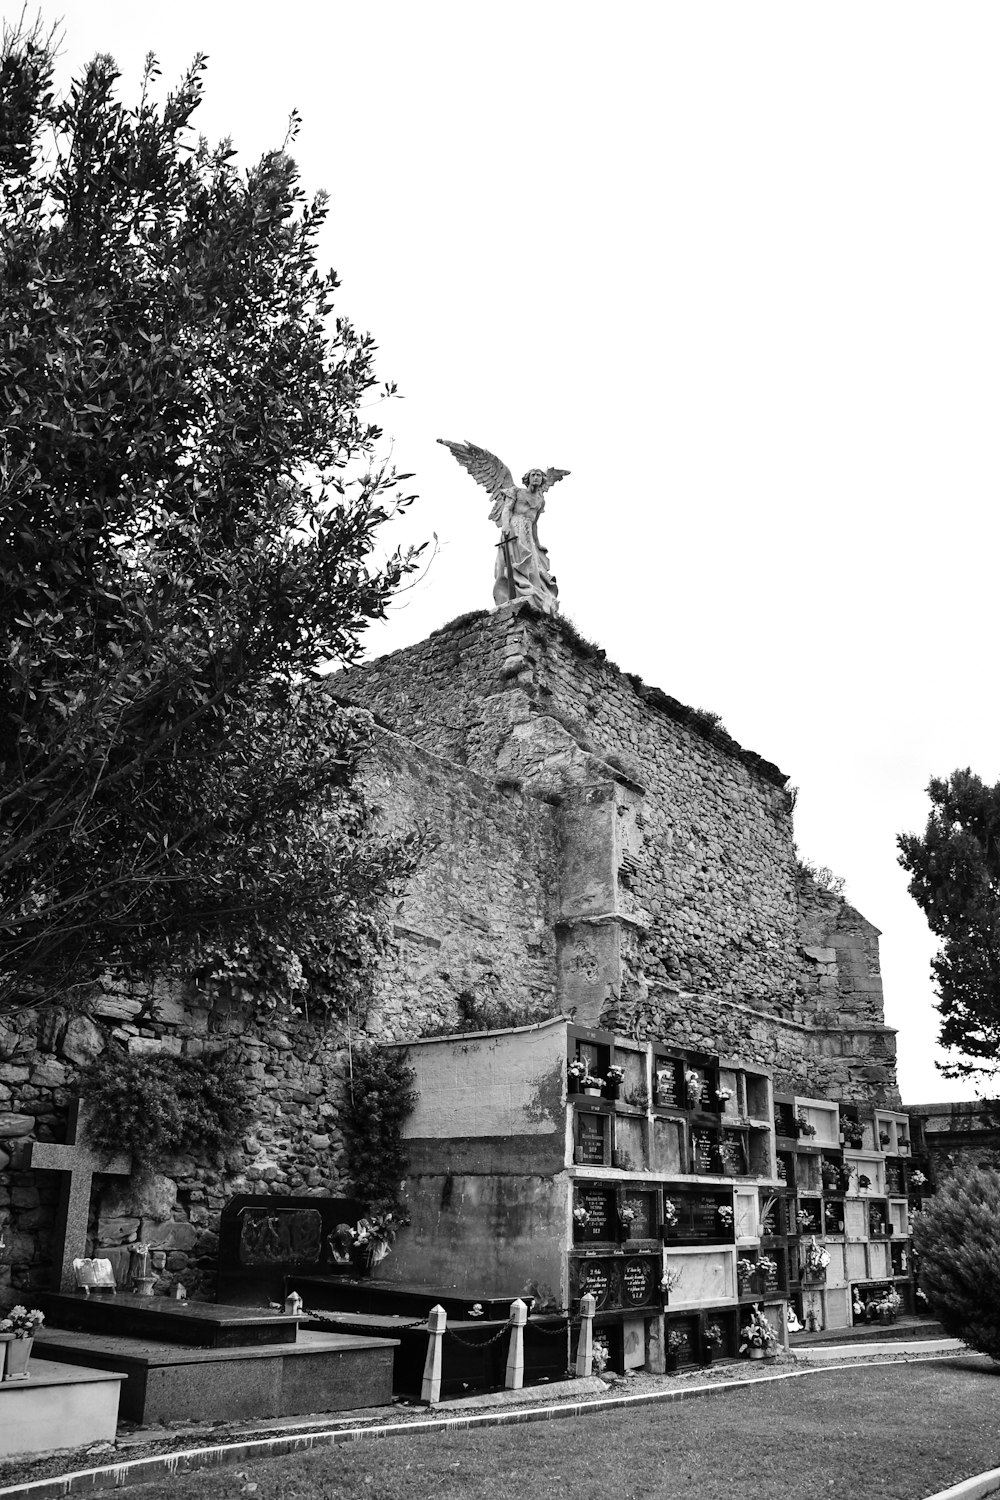 a black and white photo of a building with a statue on top of it